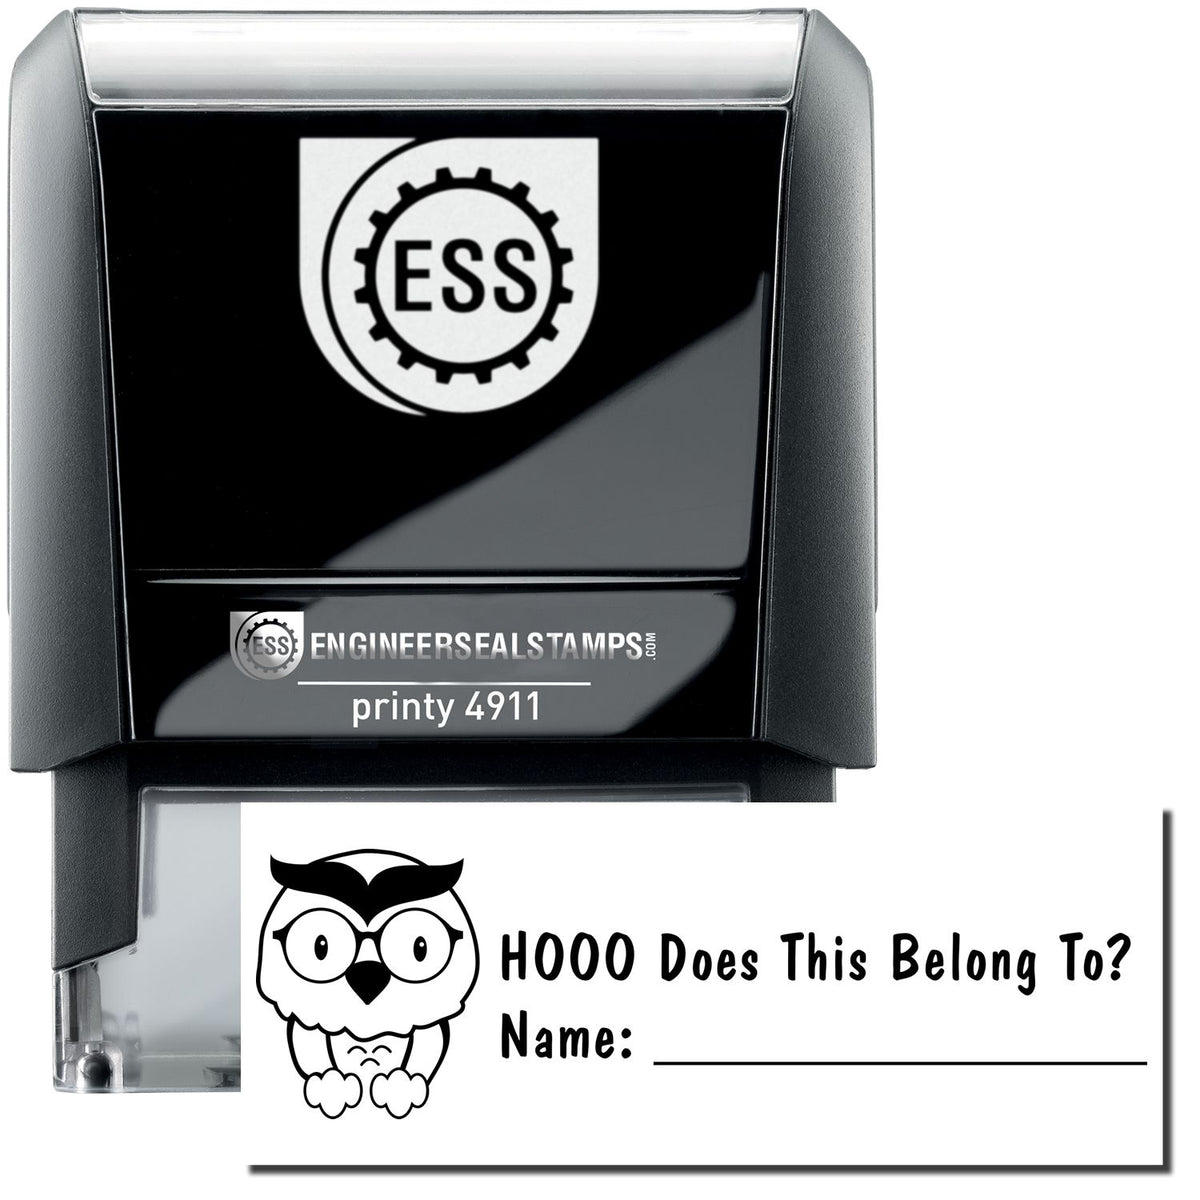 A self-inking stamp with a stamped image showing how the text &quot;HOOO Does This Belong To?&quot; and a second line that reads &quot;Name:&quot; with a line (Also, an image of an owl on the left) is displayed after stamping.